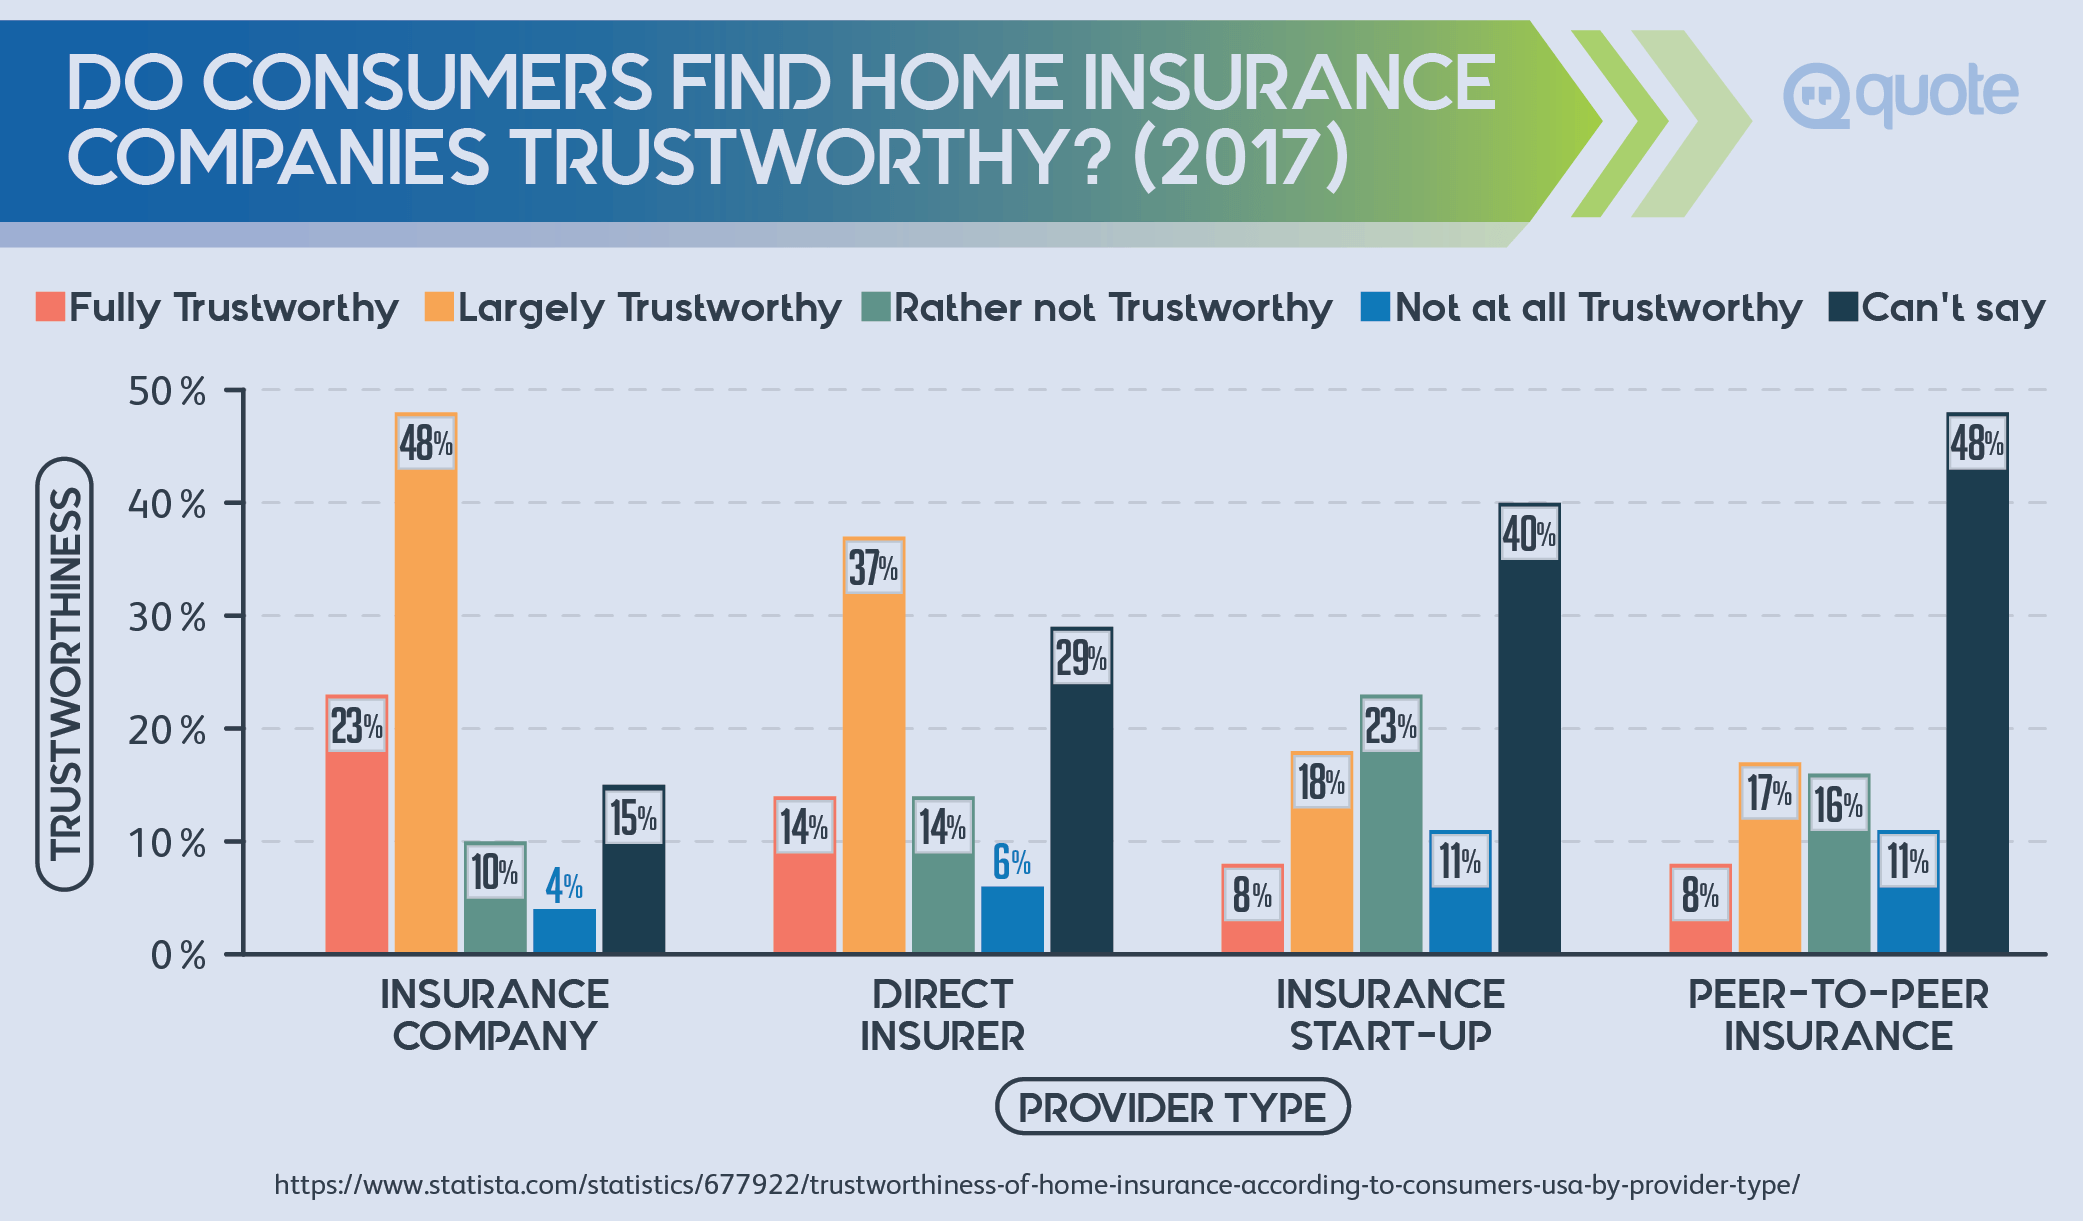 Survey: Do Consumers Find Home Insurance Companies Trustworthy?